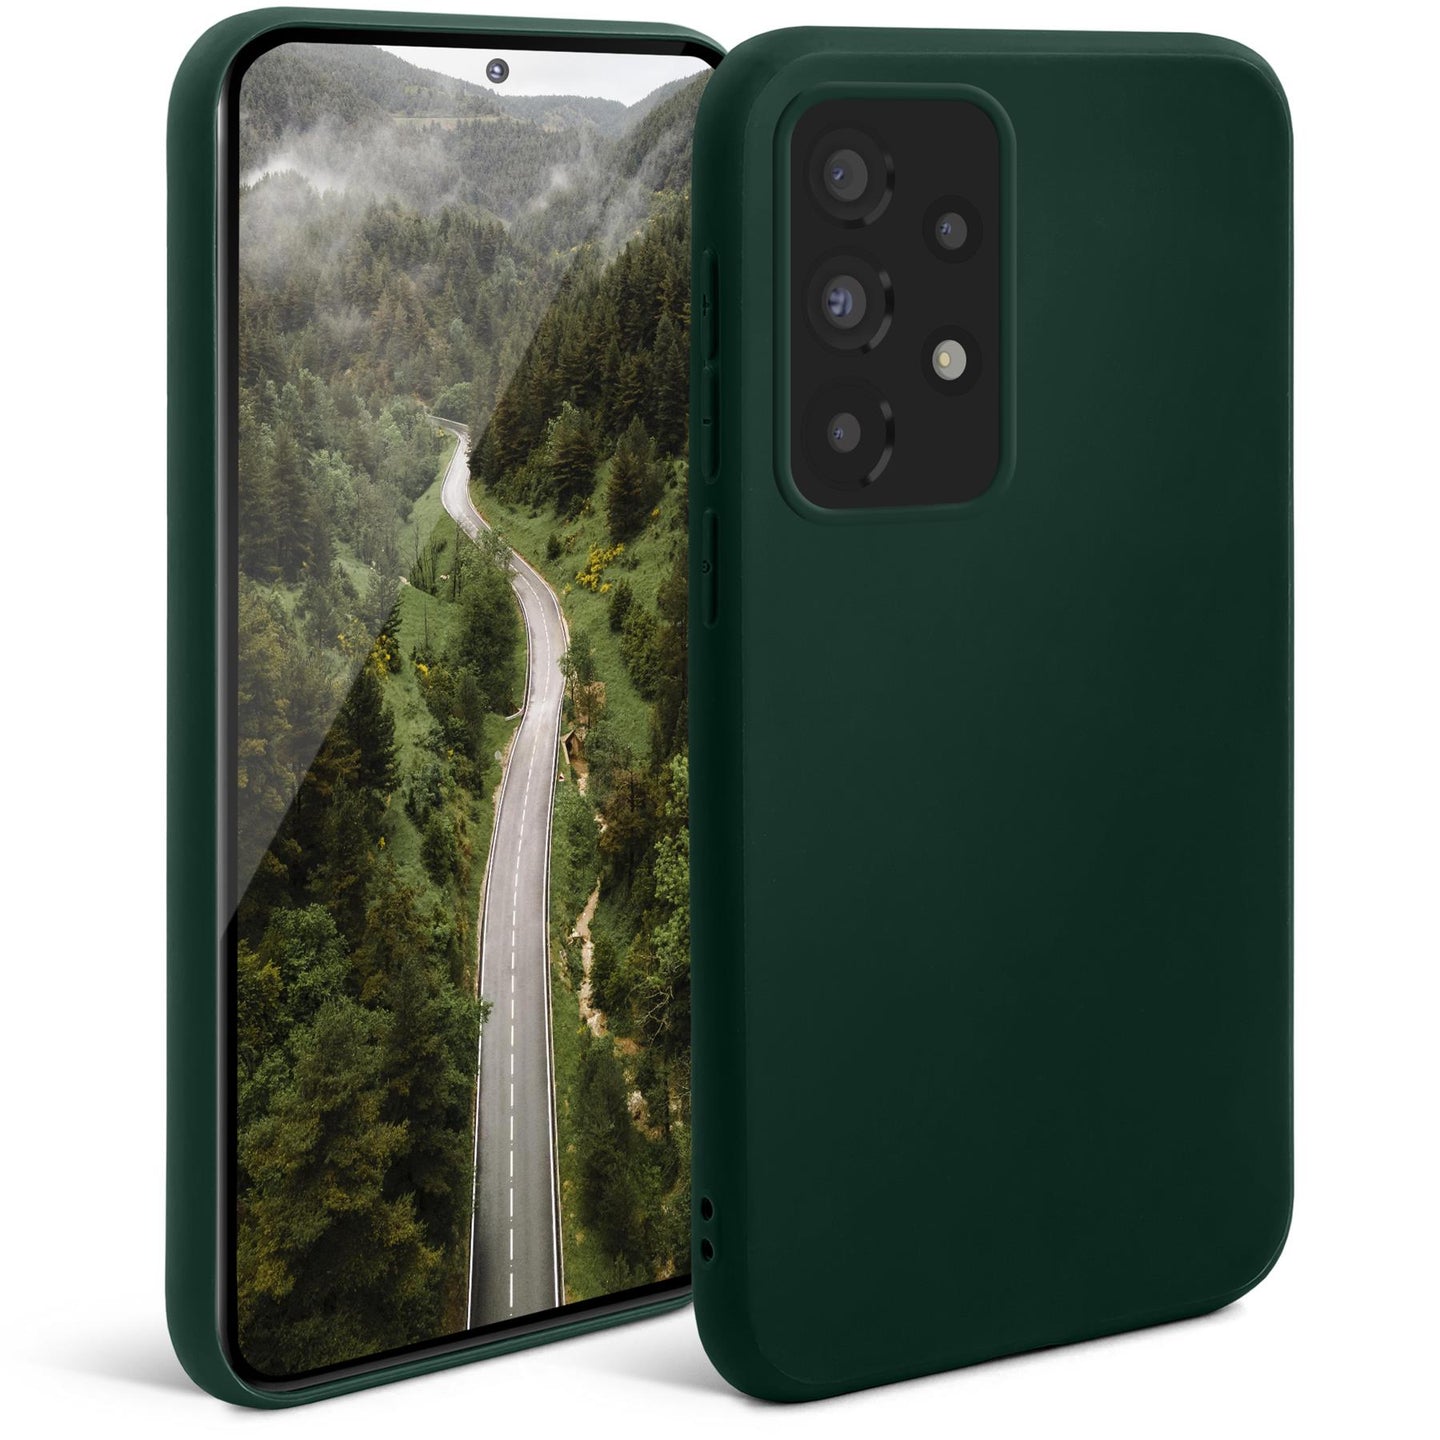 Moozy Minimalist Series Silicone Case for Samsung A33 5G, Midnight Green - Matte Finish Lightweight Mobile Phone Case Slim Soft Protective TPU Cover with Matte Surface